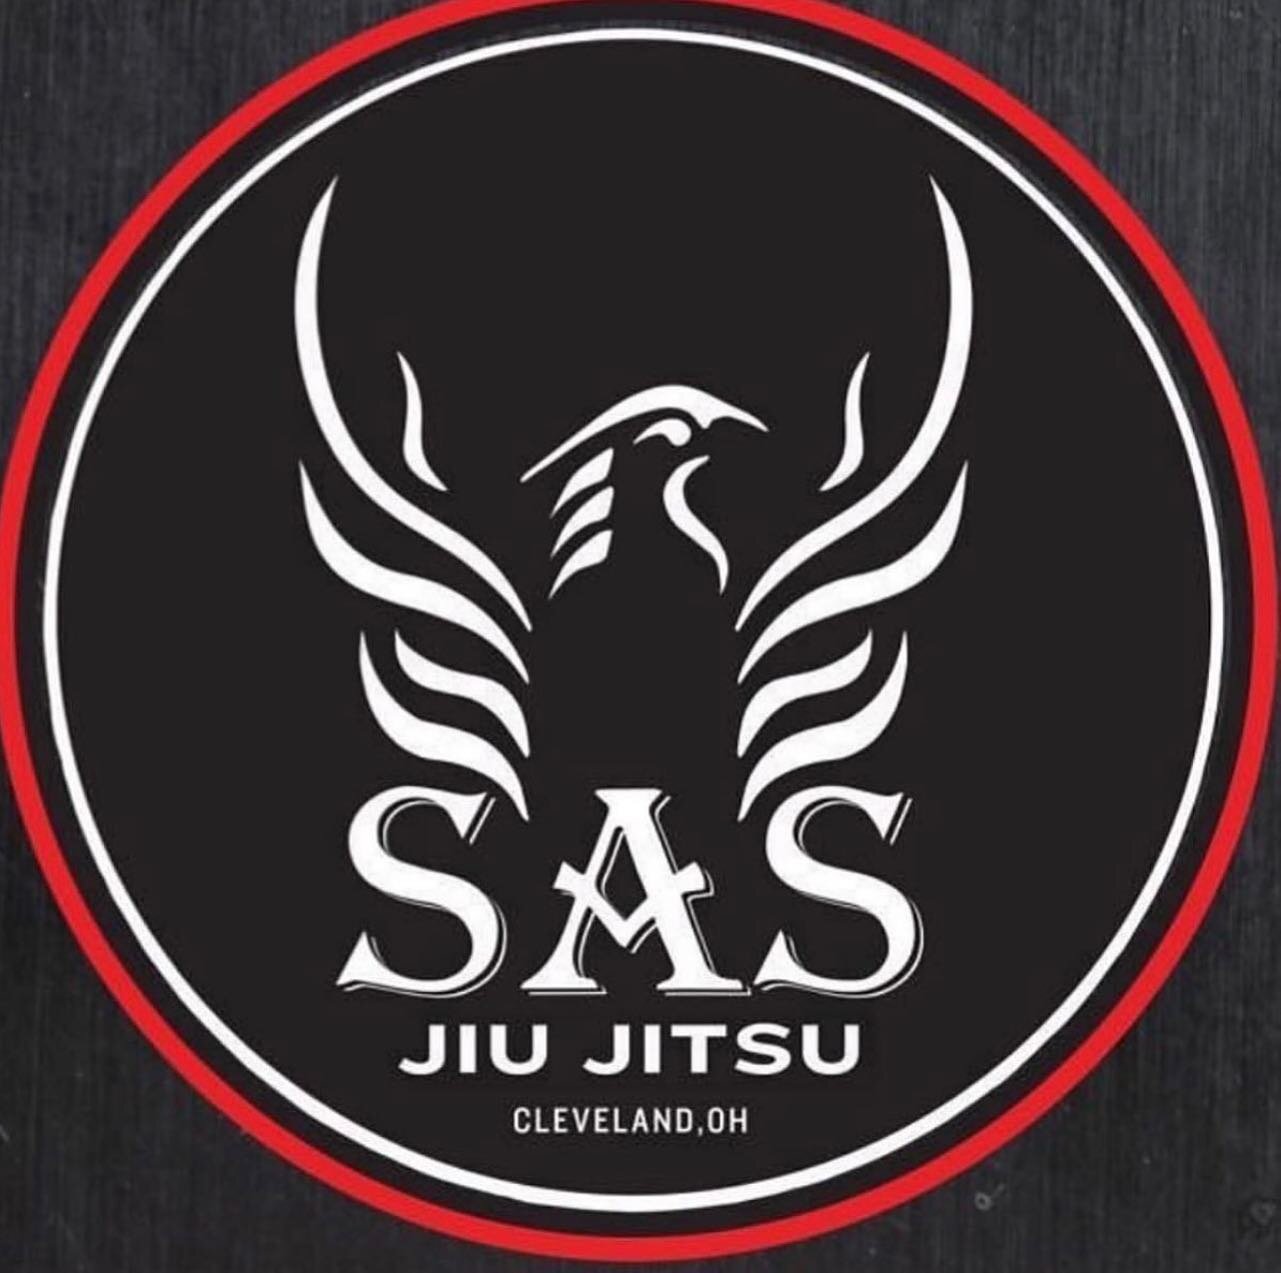 Monday: No-GI Jiu Jitsu with Coach Wyatt Routson @7pm 
Come up and join us. 
Self Defense.&nbsp;&nbsp;
Grappling.&nbsp;&nbsp;
Competition.&nbsp;&nbsp;
Better your Health by increasing your self esteem, gain improved focus and discipline. 
Whatever yo